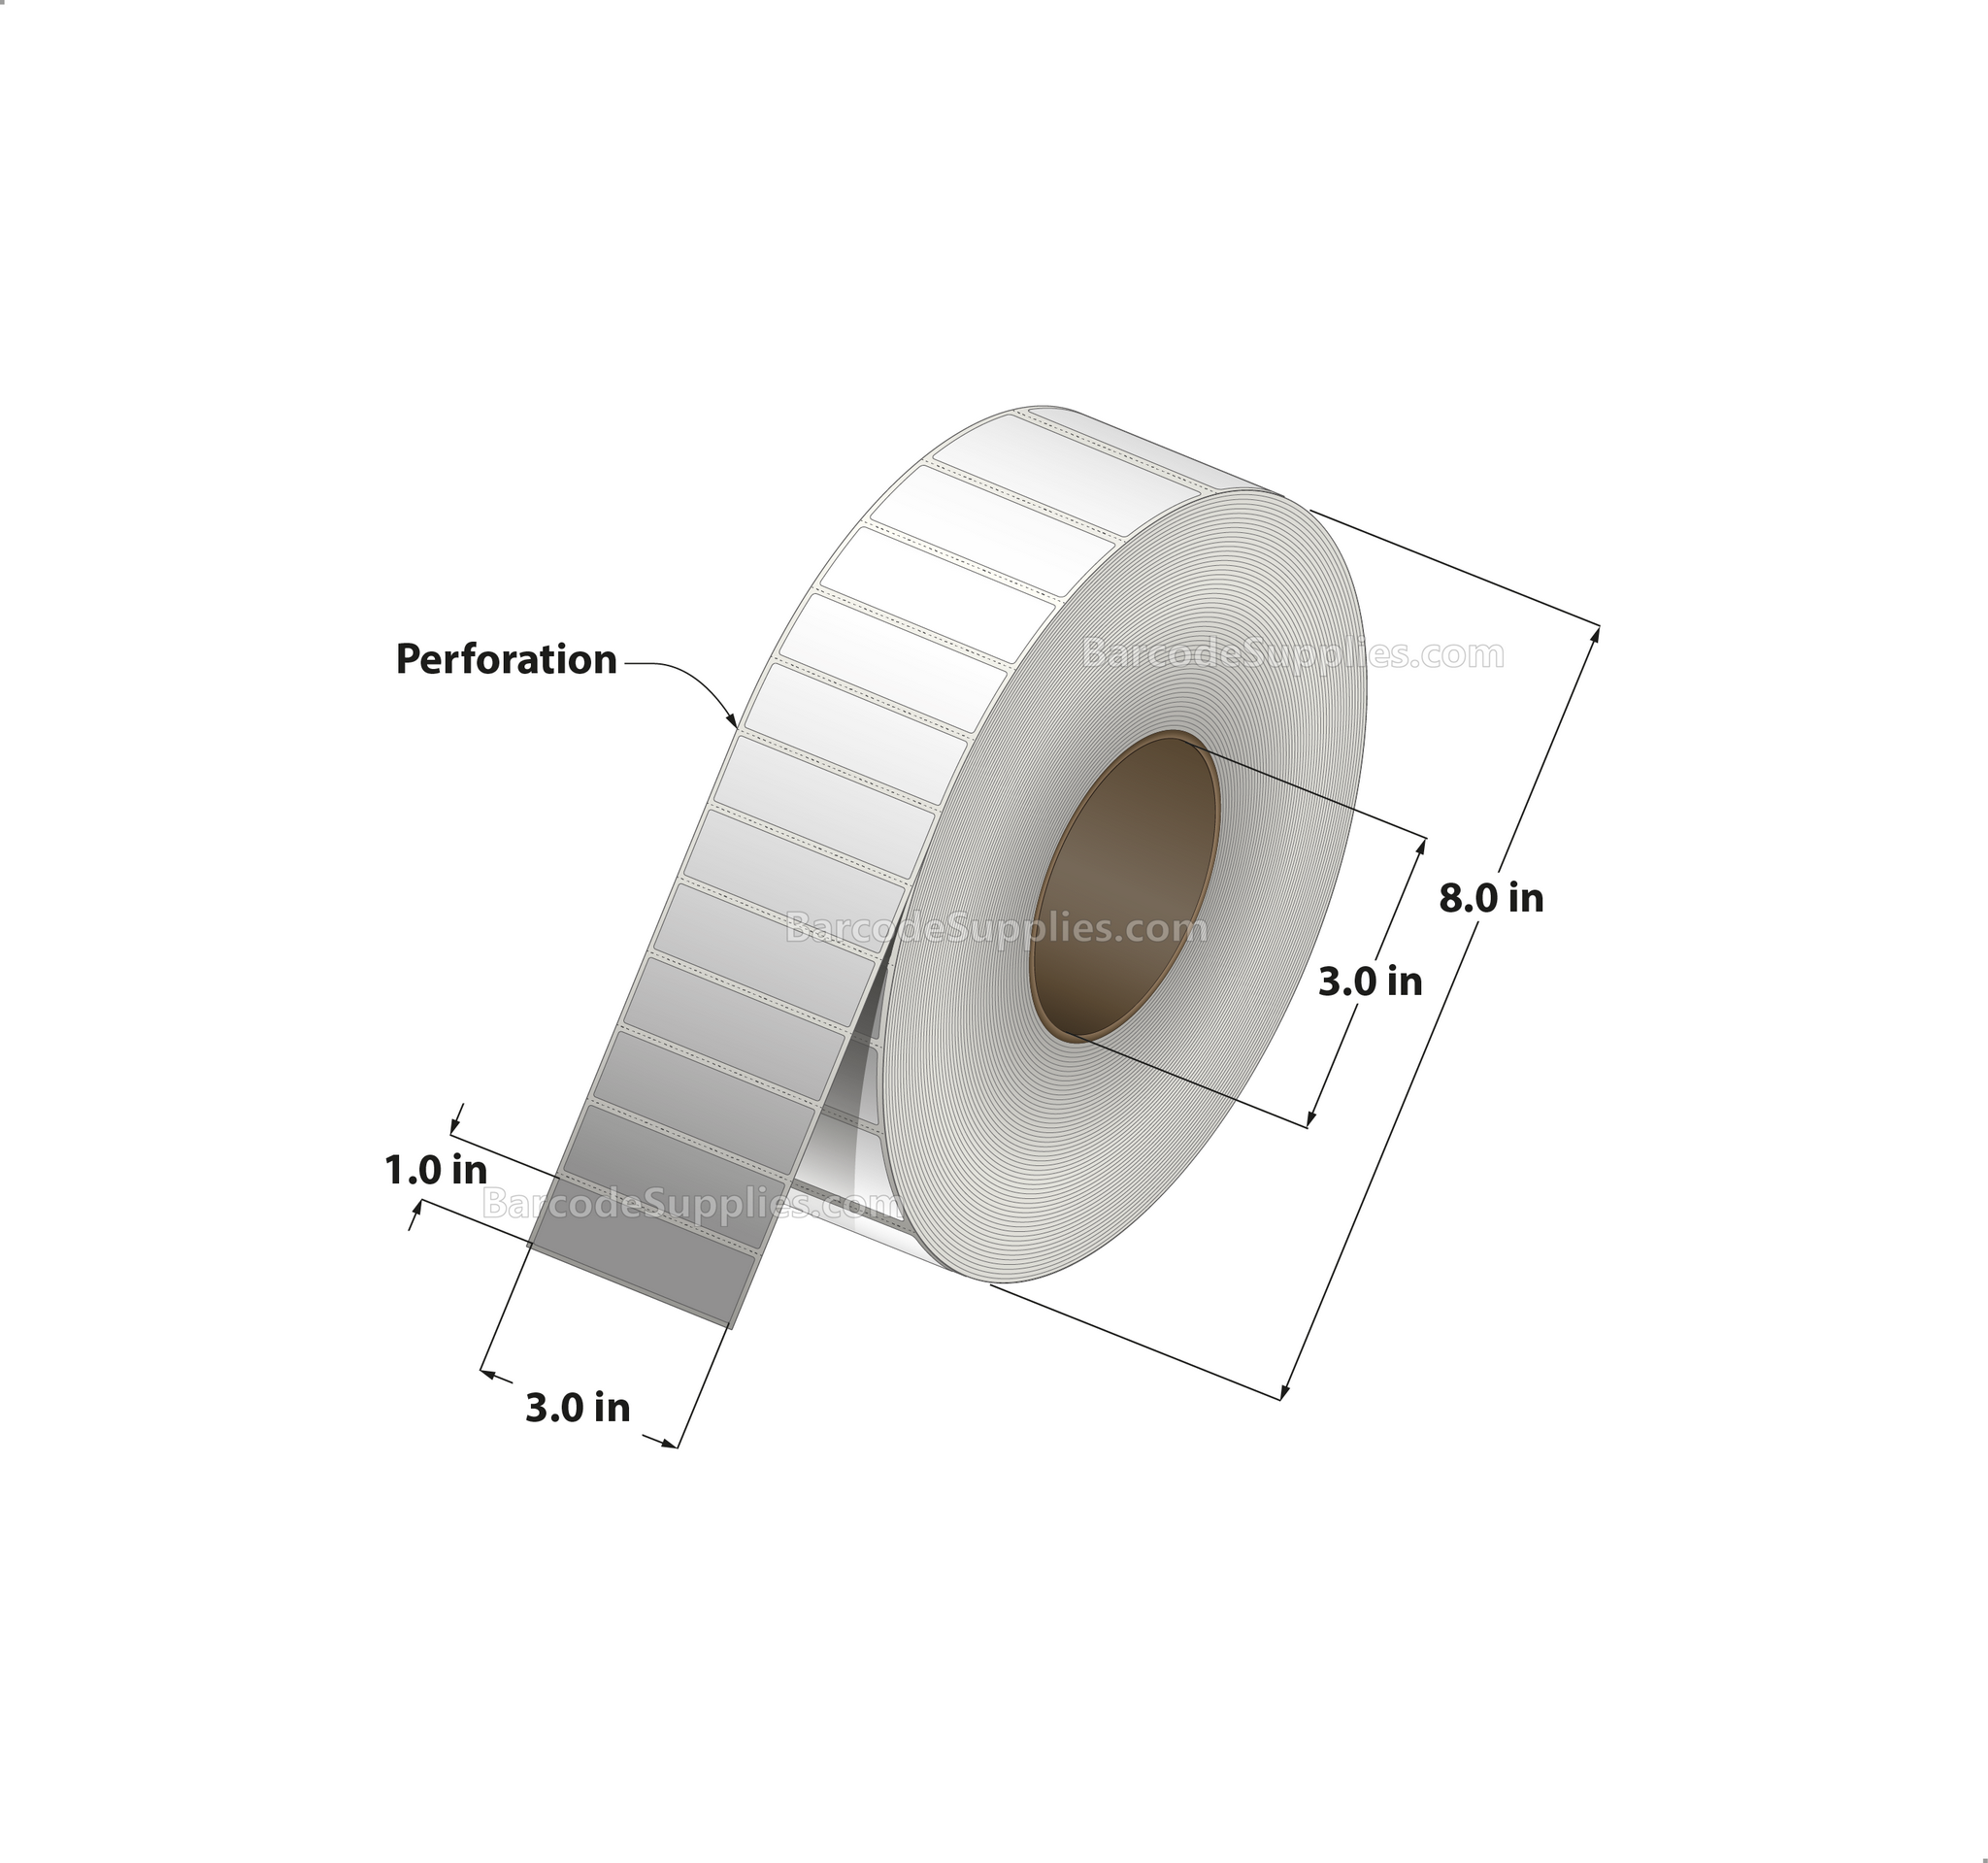 3 x 1 Direct Thermal White Labels With Acrylic Adhesive - Perforated - 5500 Labels Per Roll - Carton Of 8 Rolls - 44000 Labels Total - MPN: RDS-3-1-5500-3 - BarcodeSource, Inc.